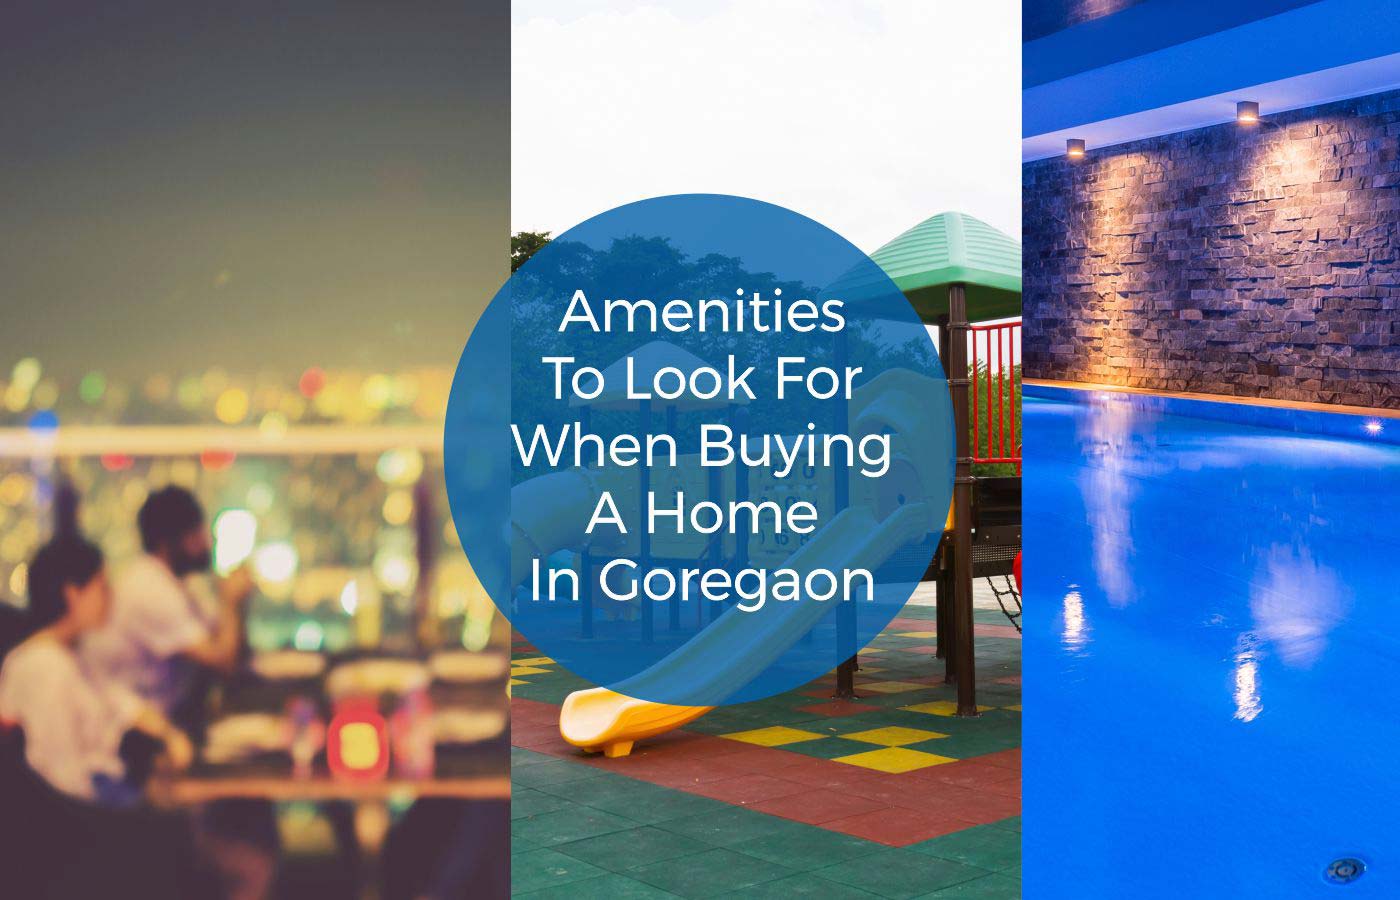 Amenities to Look For When Buying a Home in Goregaon